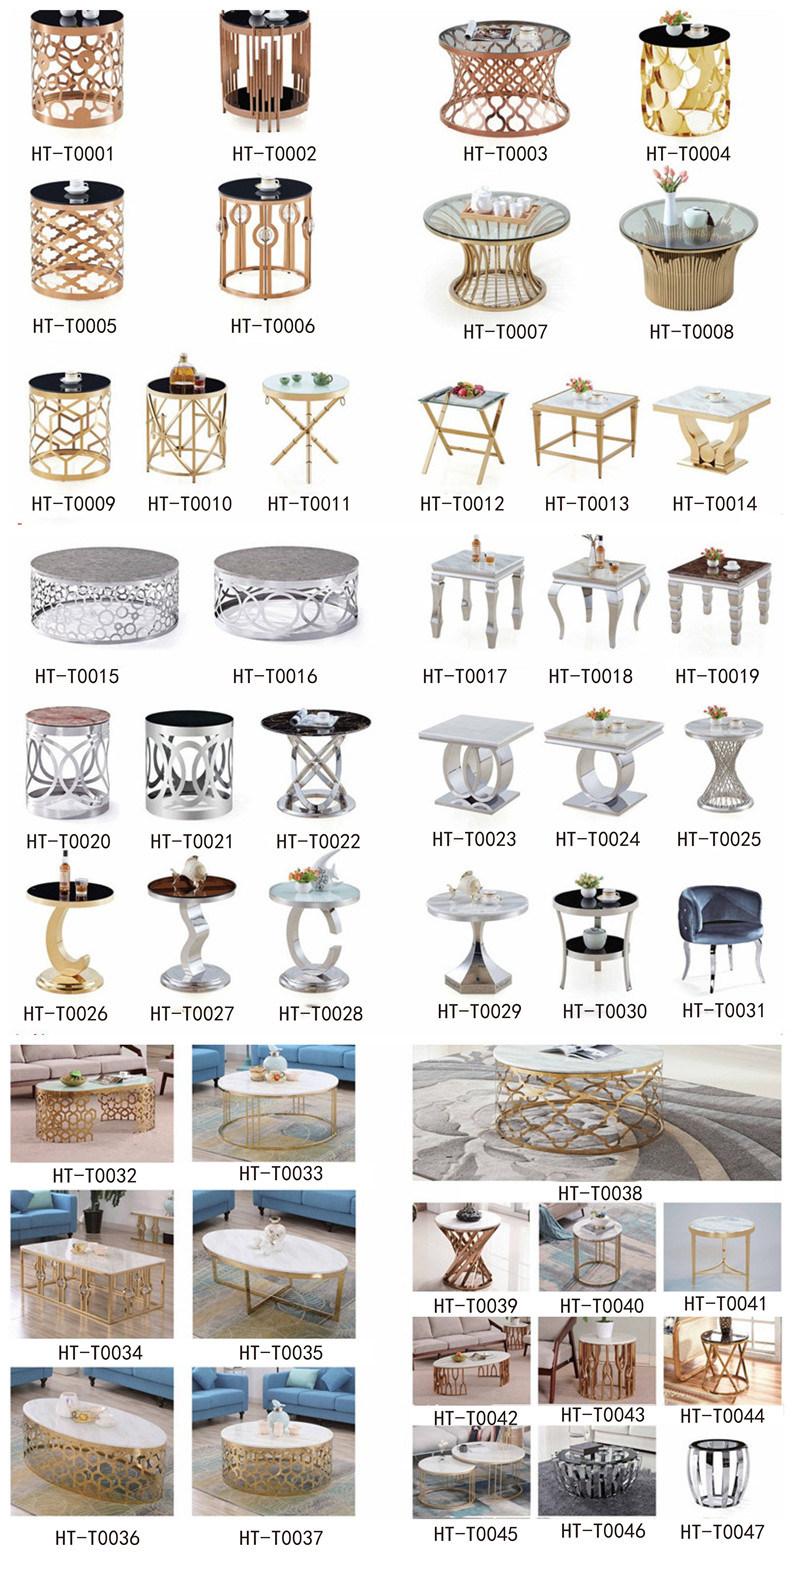 Modern China Home Hotel Wholesale Glass/ Marble Top 8 6 10 12 Seaters Round Rectangle Dining Chair Table Furniture Set Royal Event Wedding Gold Banquet Table